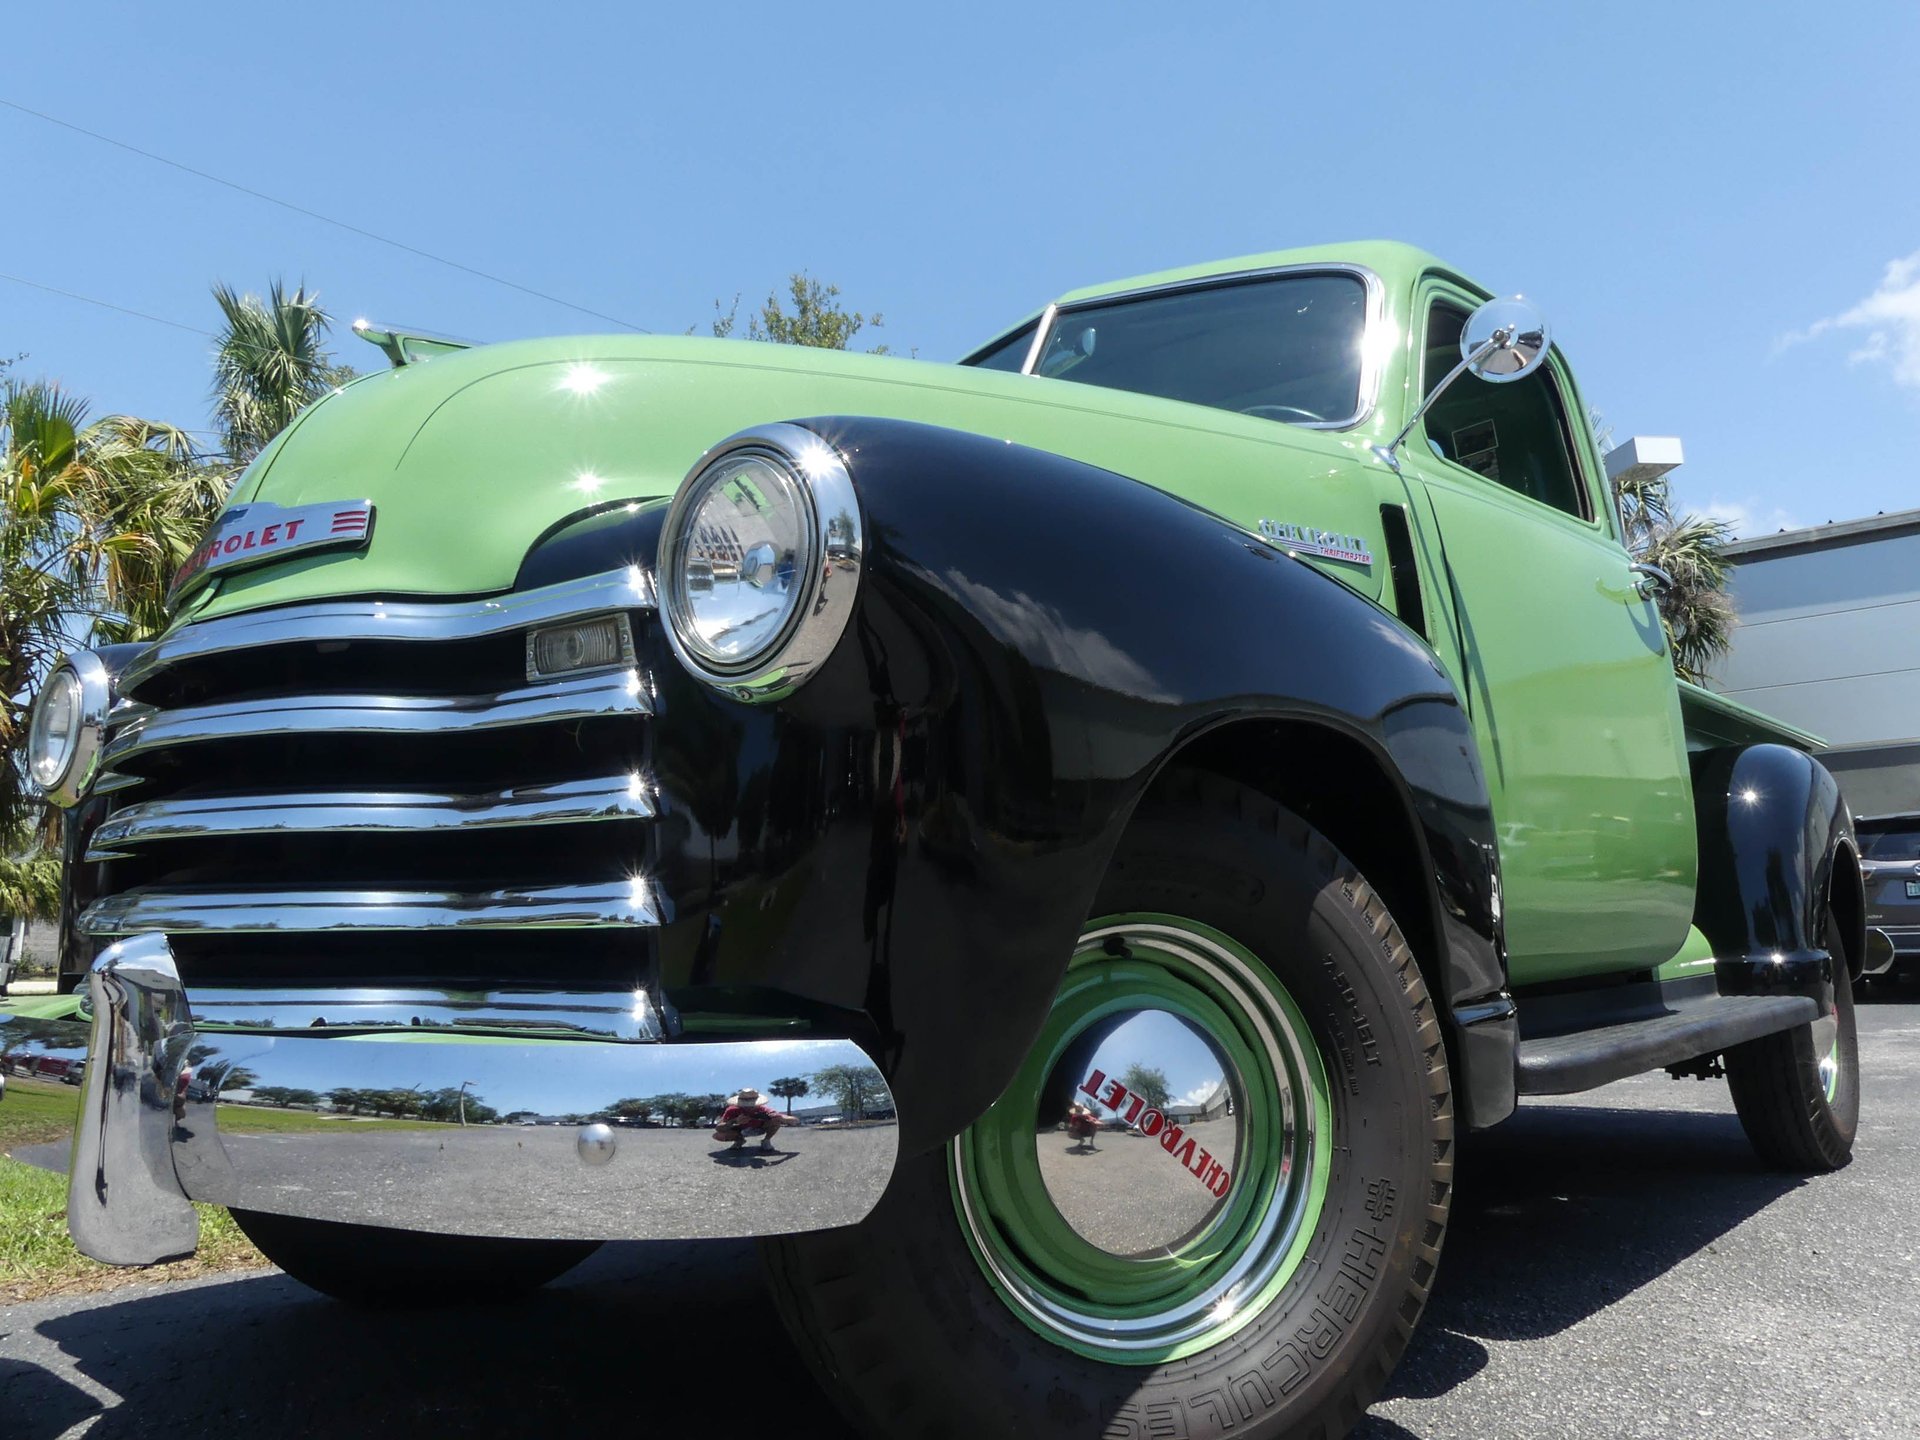 0826-TAMPA | 1947 Chevrolet 3100 Thriftmaster | Survivor Classic Cars Services